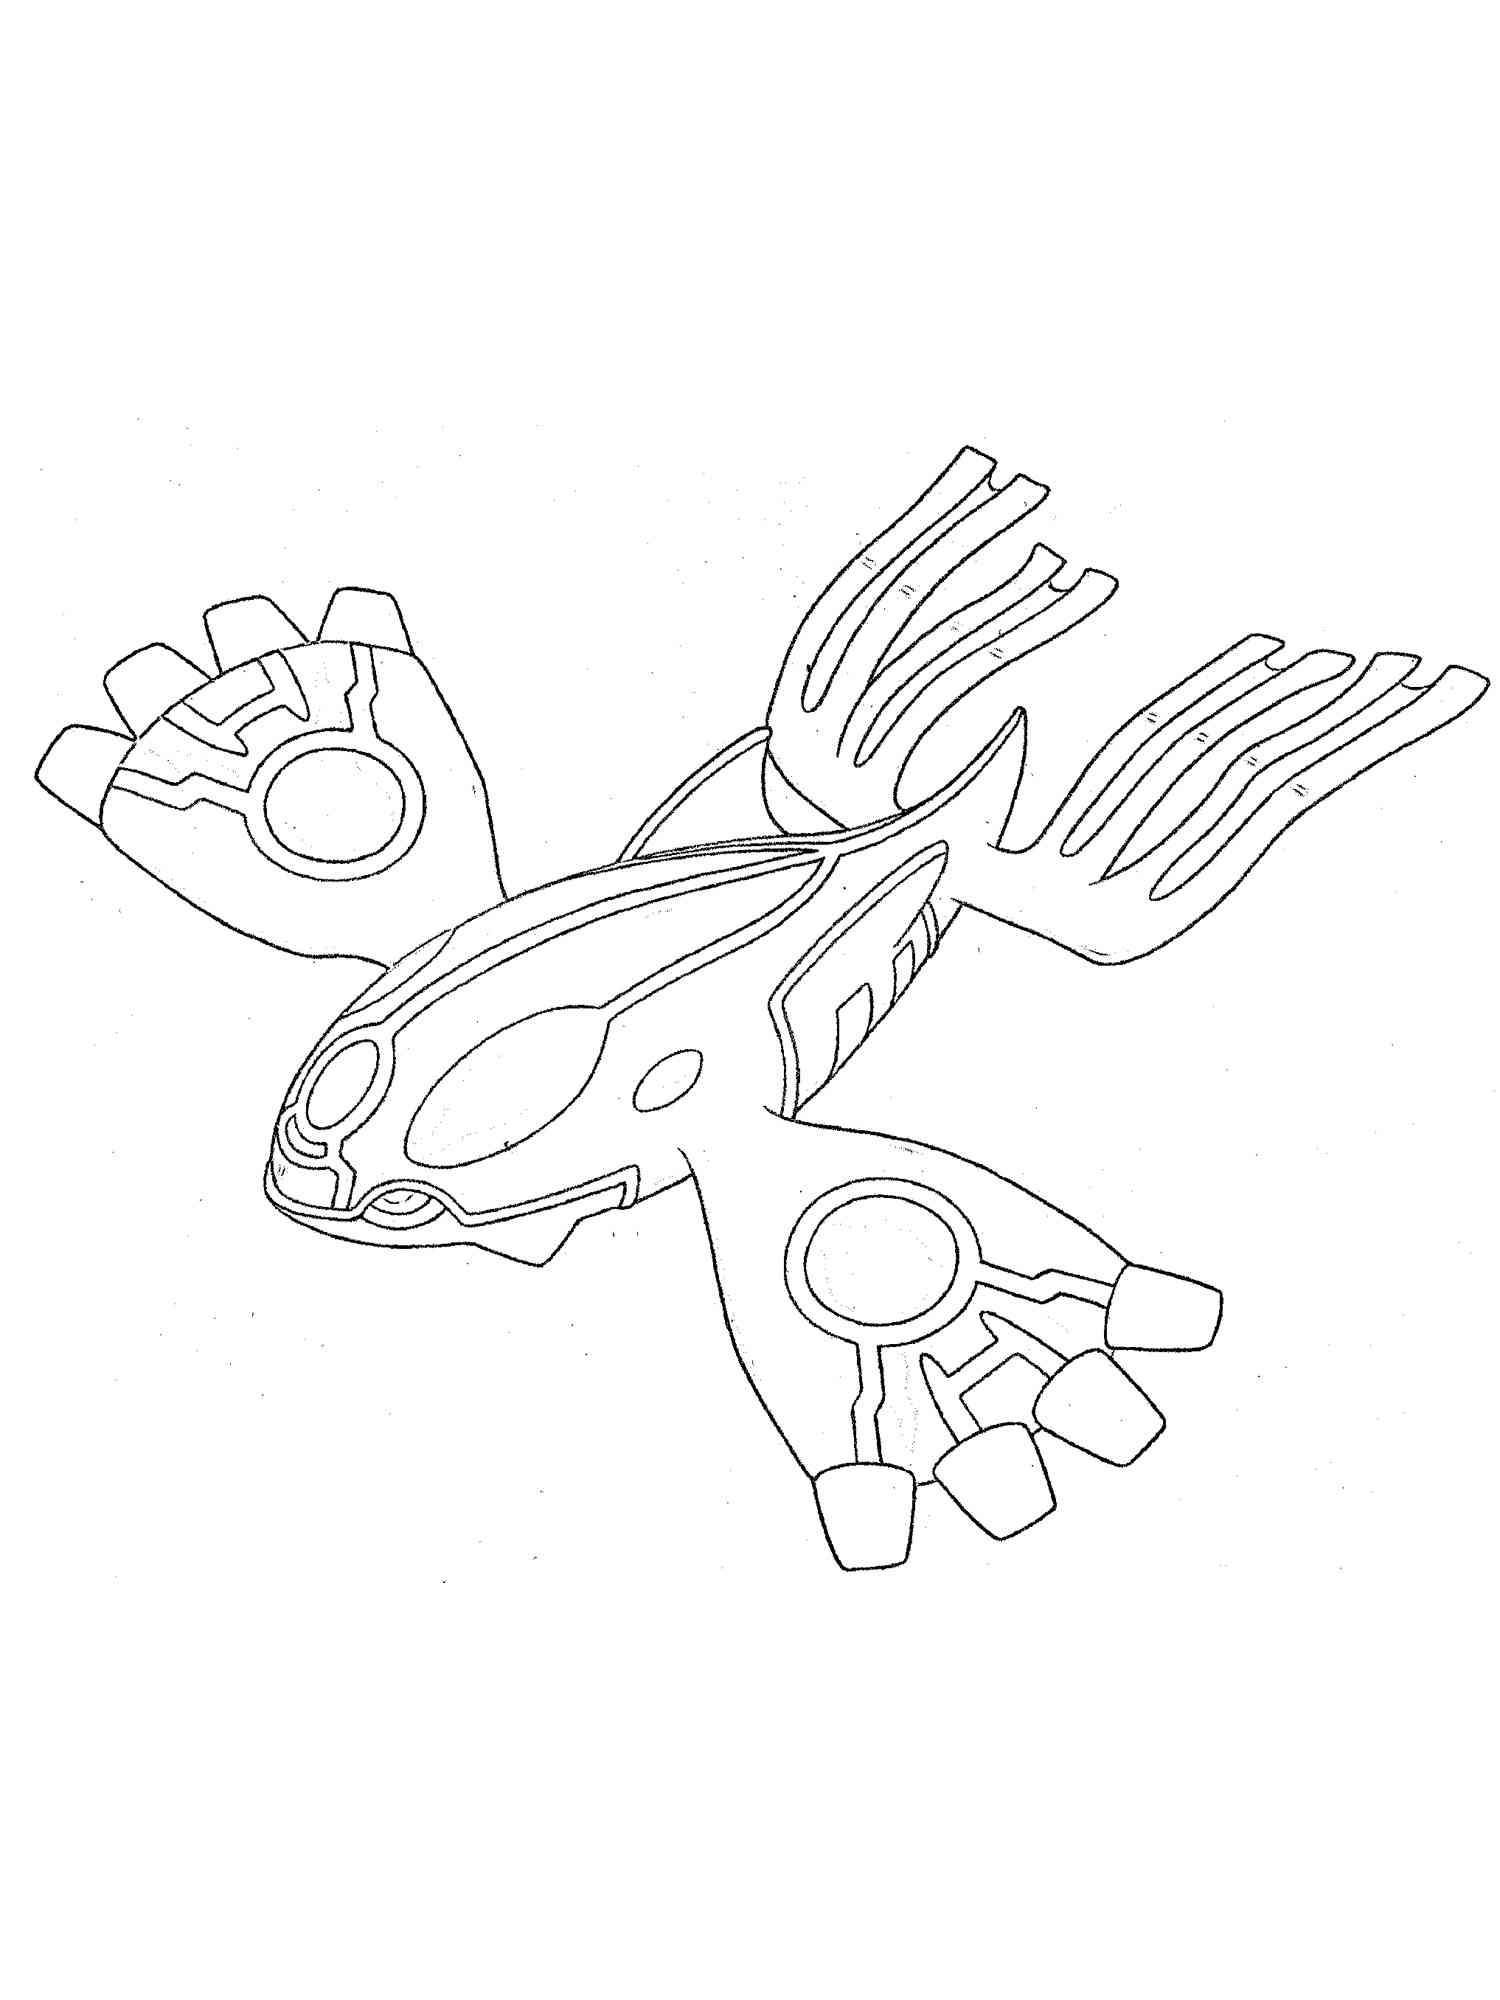 Kyogre Pokemon coloring pages - Free Printable